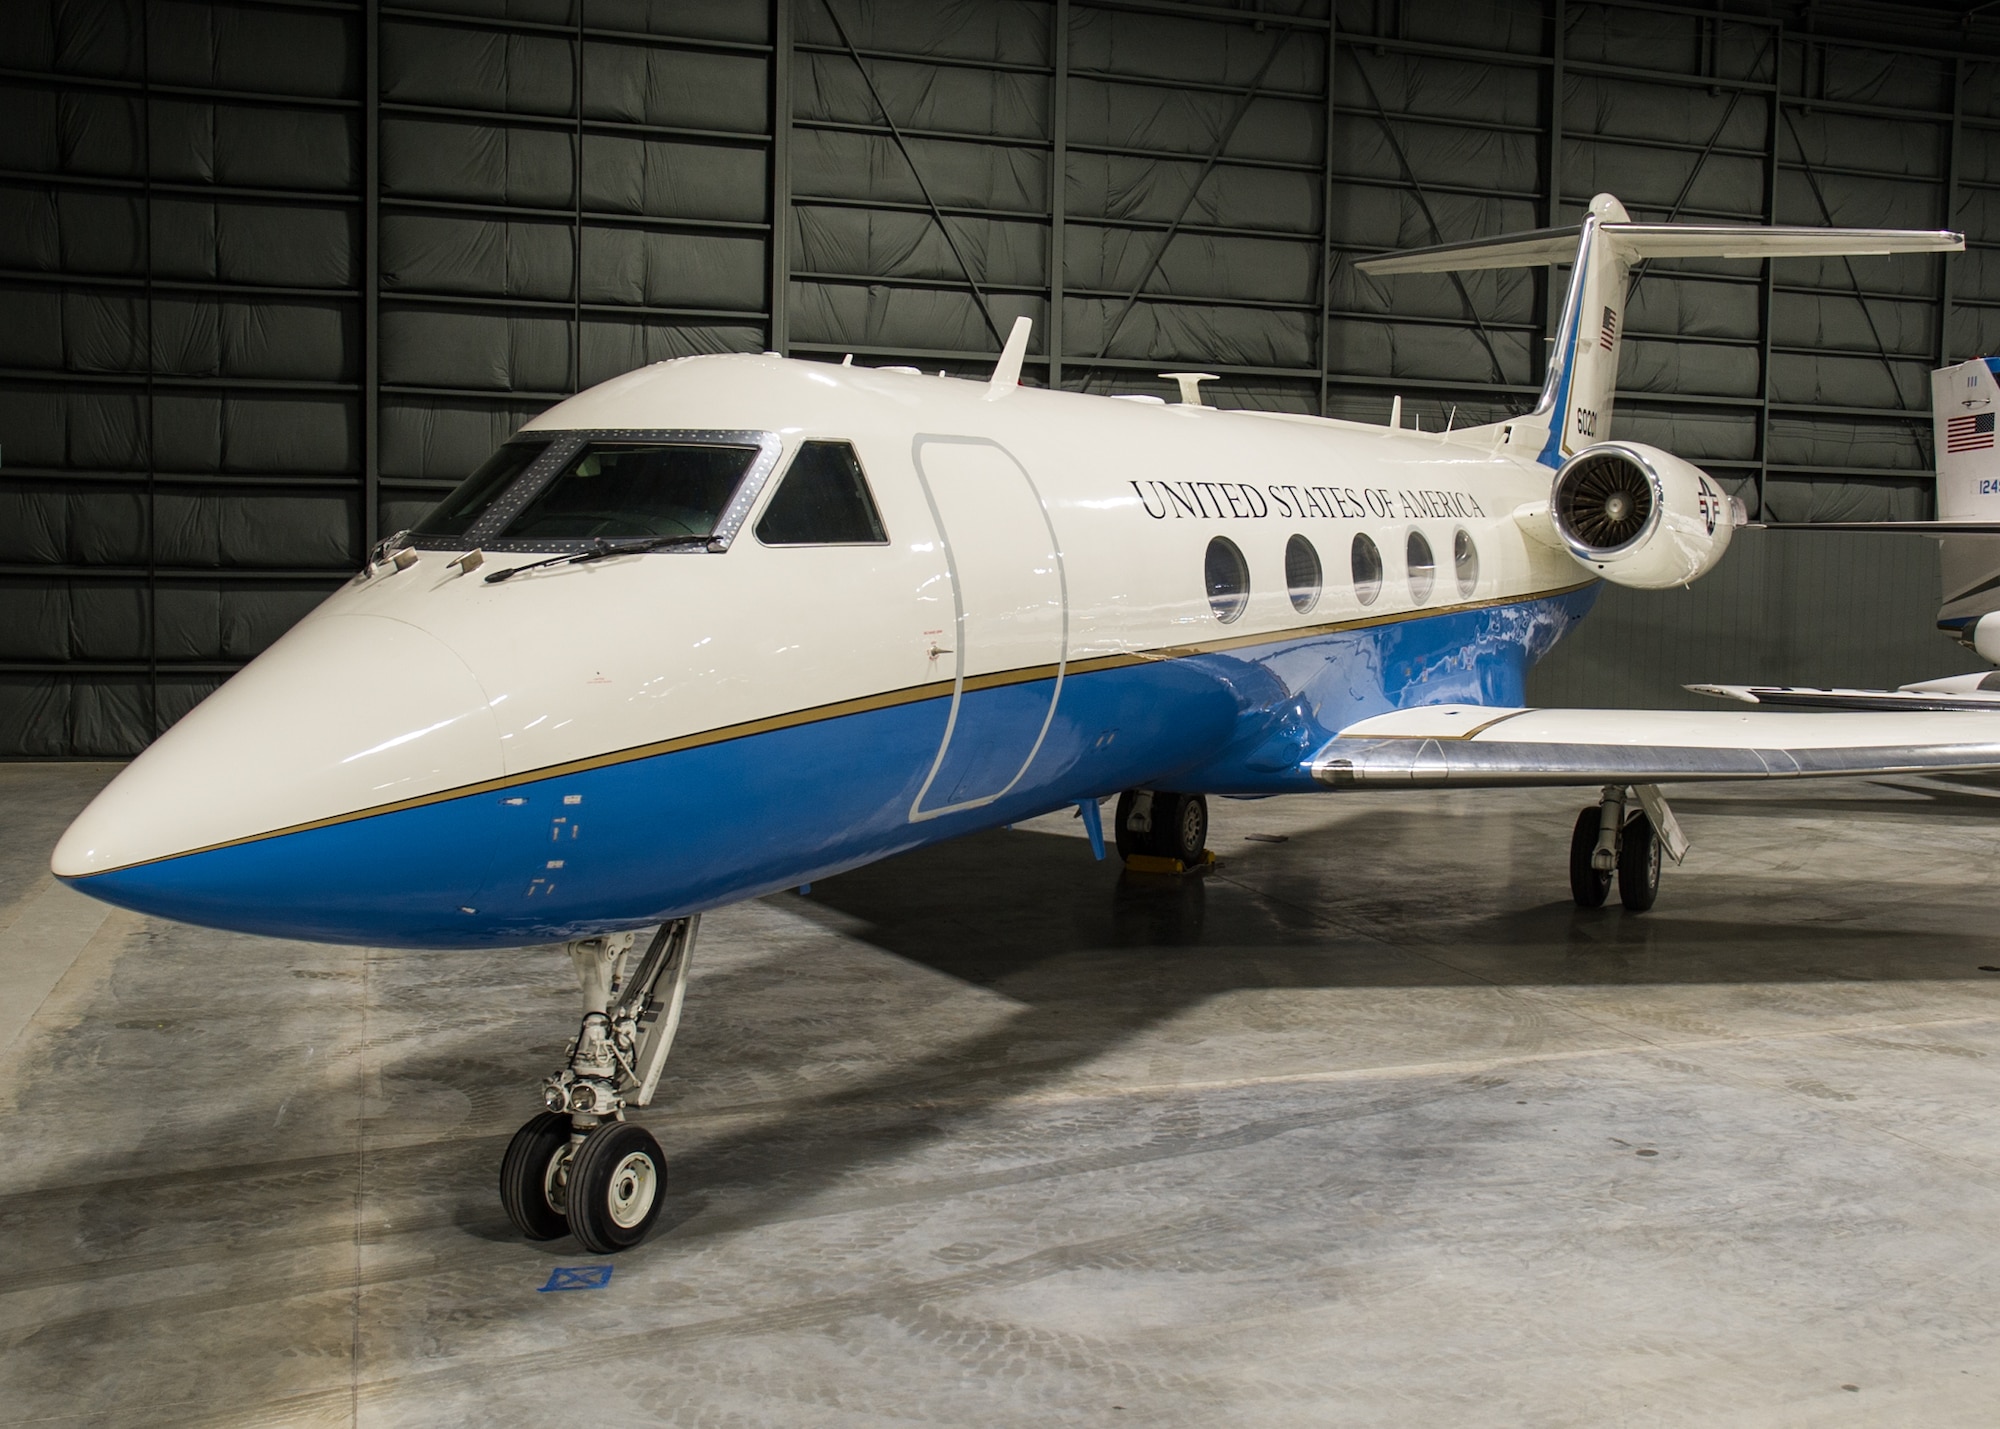 DAYTON, Ohio -- Gulfstream Aerospace C-20B in the Presidential Gallery at the National Museum of the United States Air Force. (U.S. Air Force photo by Ken LaRock)
